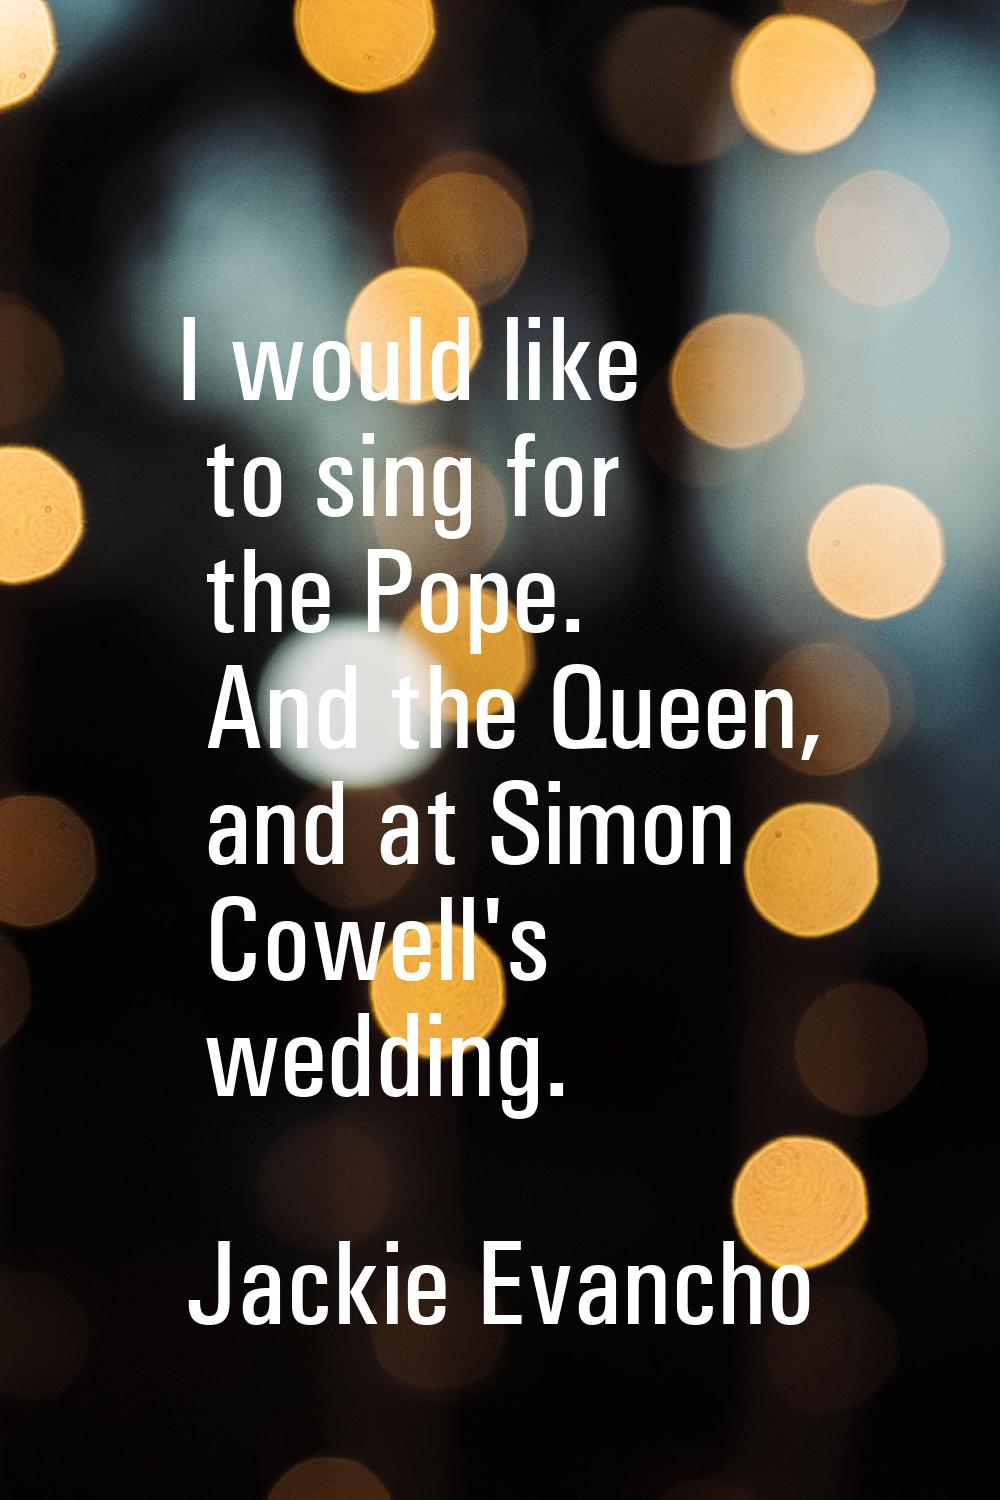 I would like to sing for the Pope. And the Queen, and at Simon Cowell's wedding.